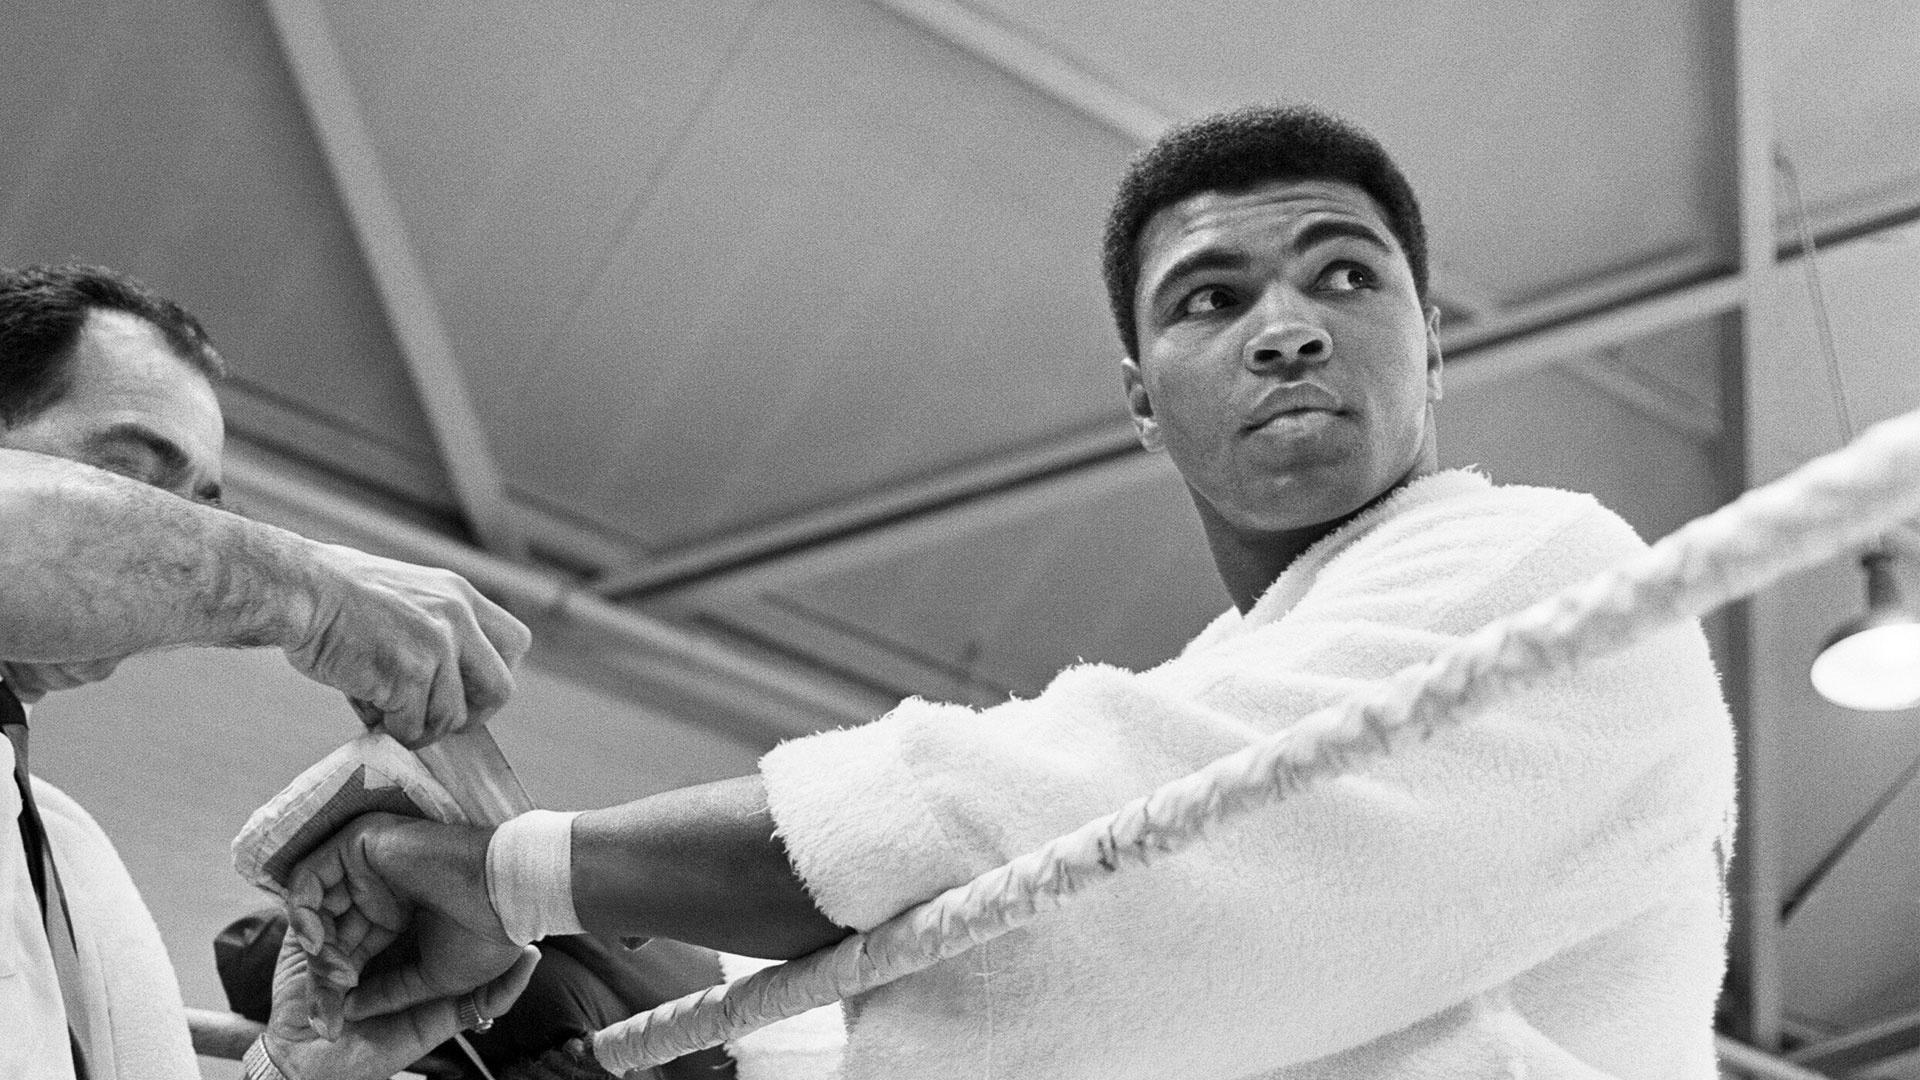 Mr. Muhammad Ali Has Just Refused to Be Inducted' - The New York Times